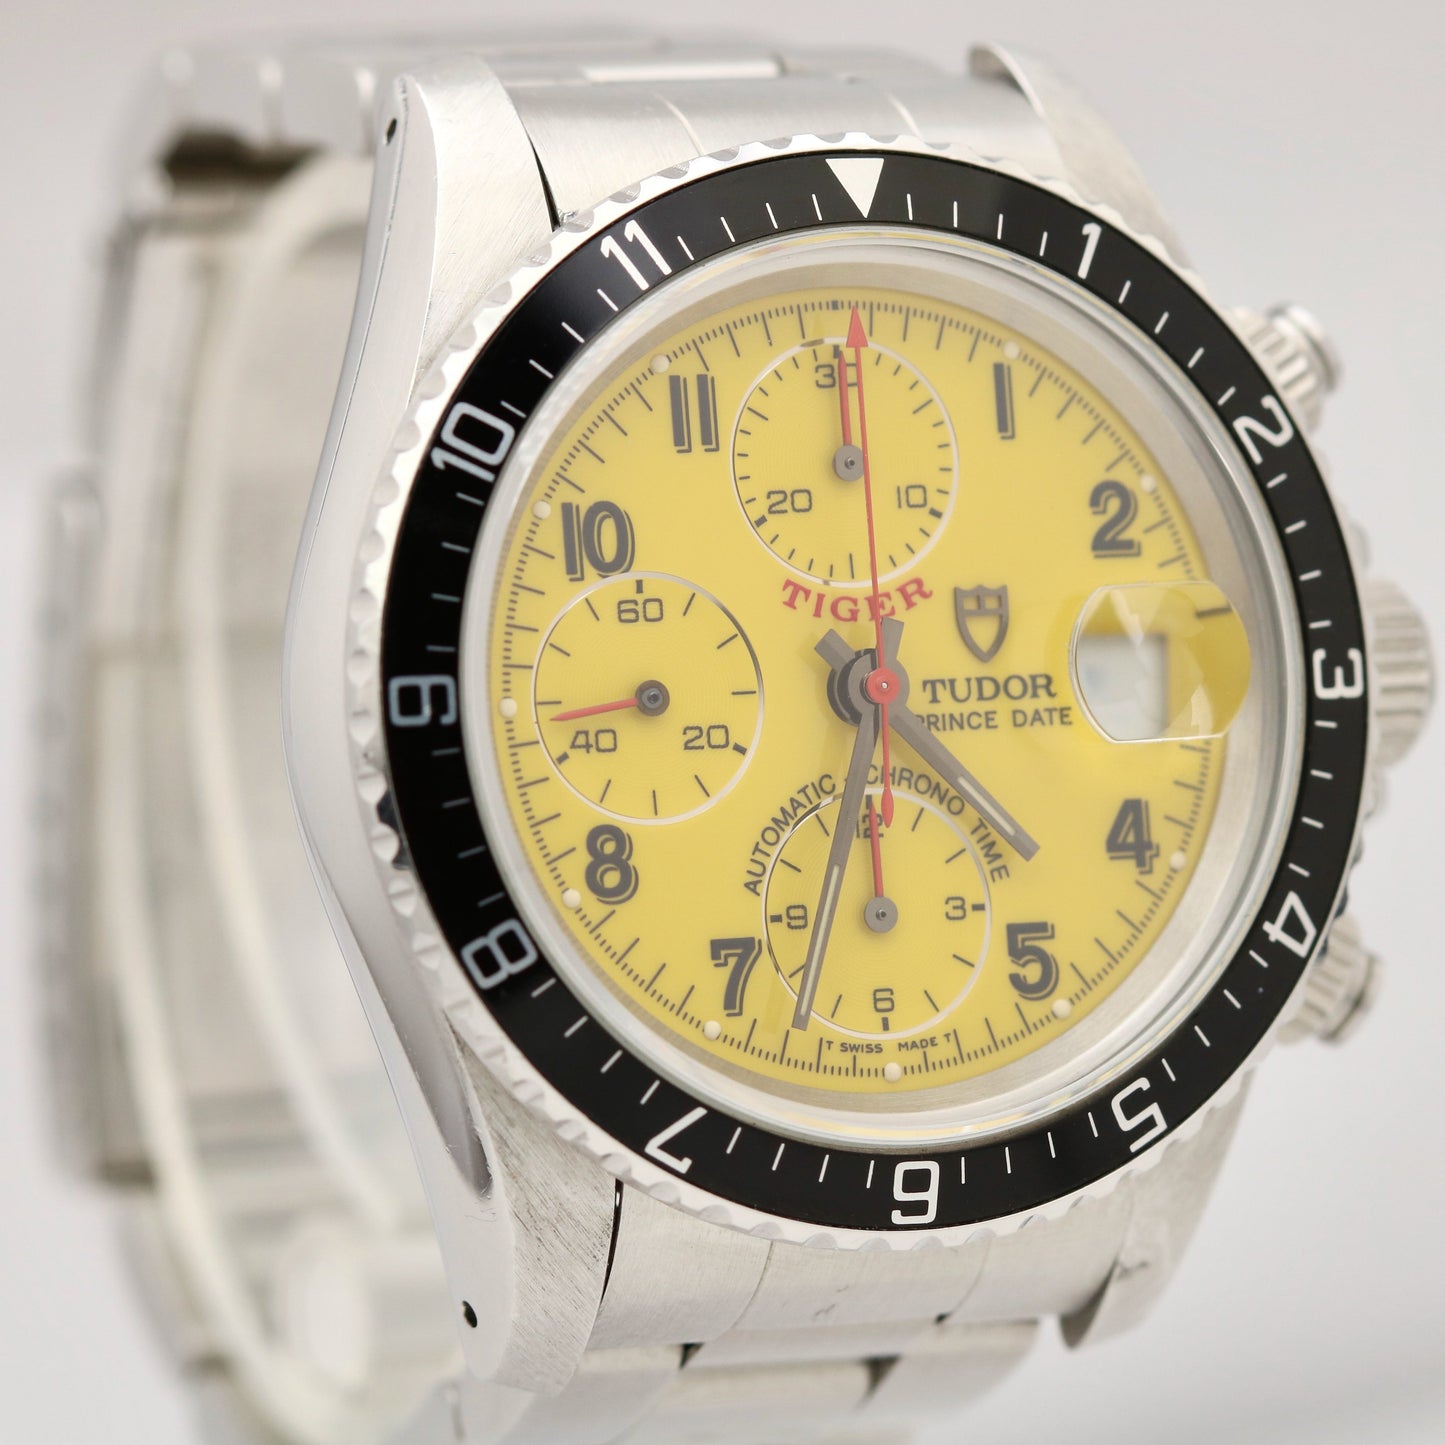 Tudor Prince Date Tiger 79270 Chronograph YELLOW 40mm Stainless Steel Watch